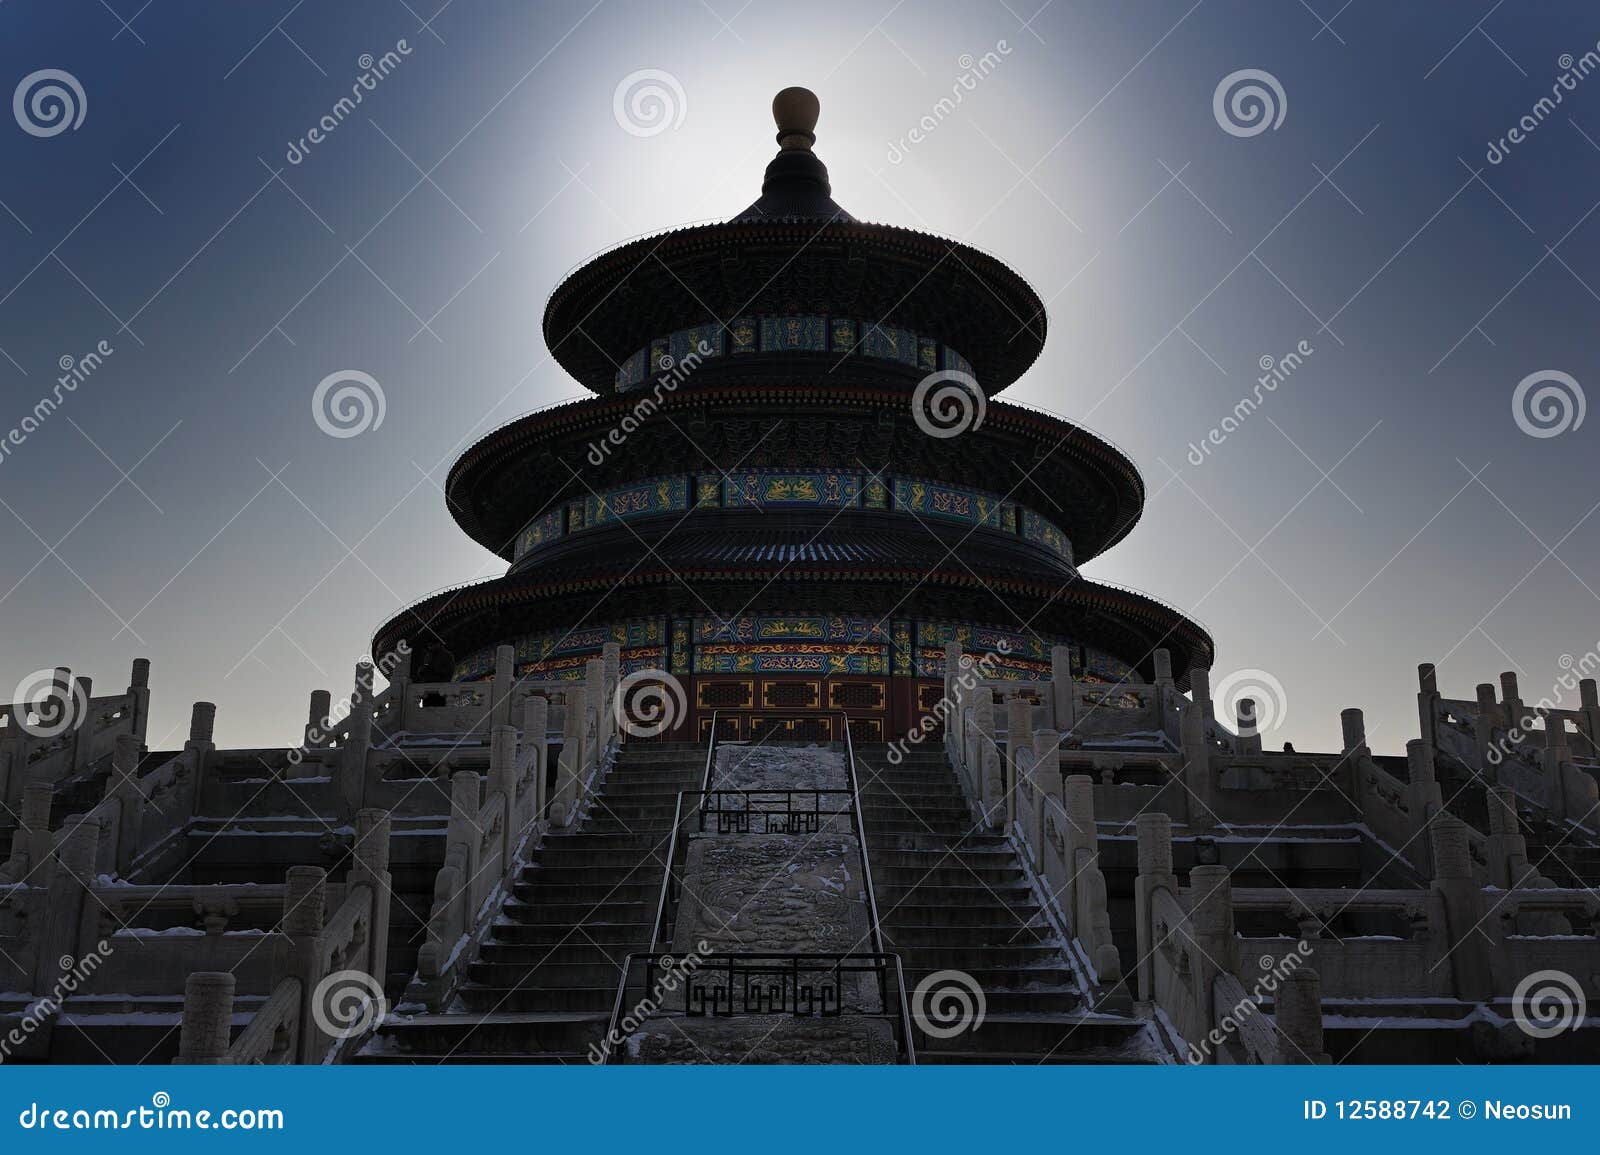 the temple of heaven is located in southern beijin